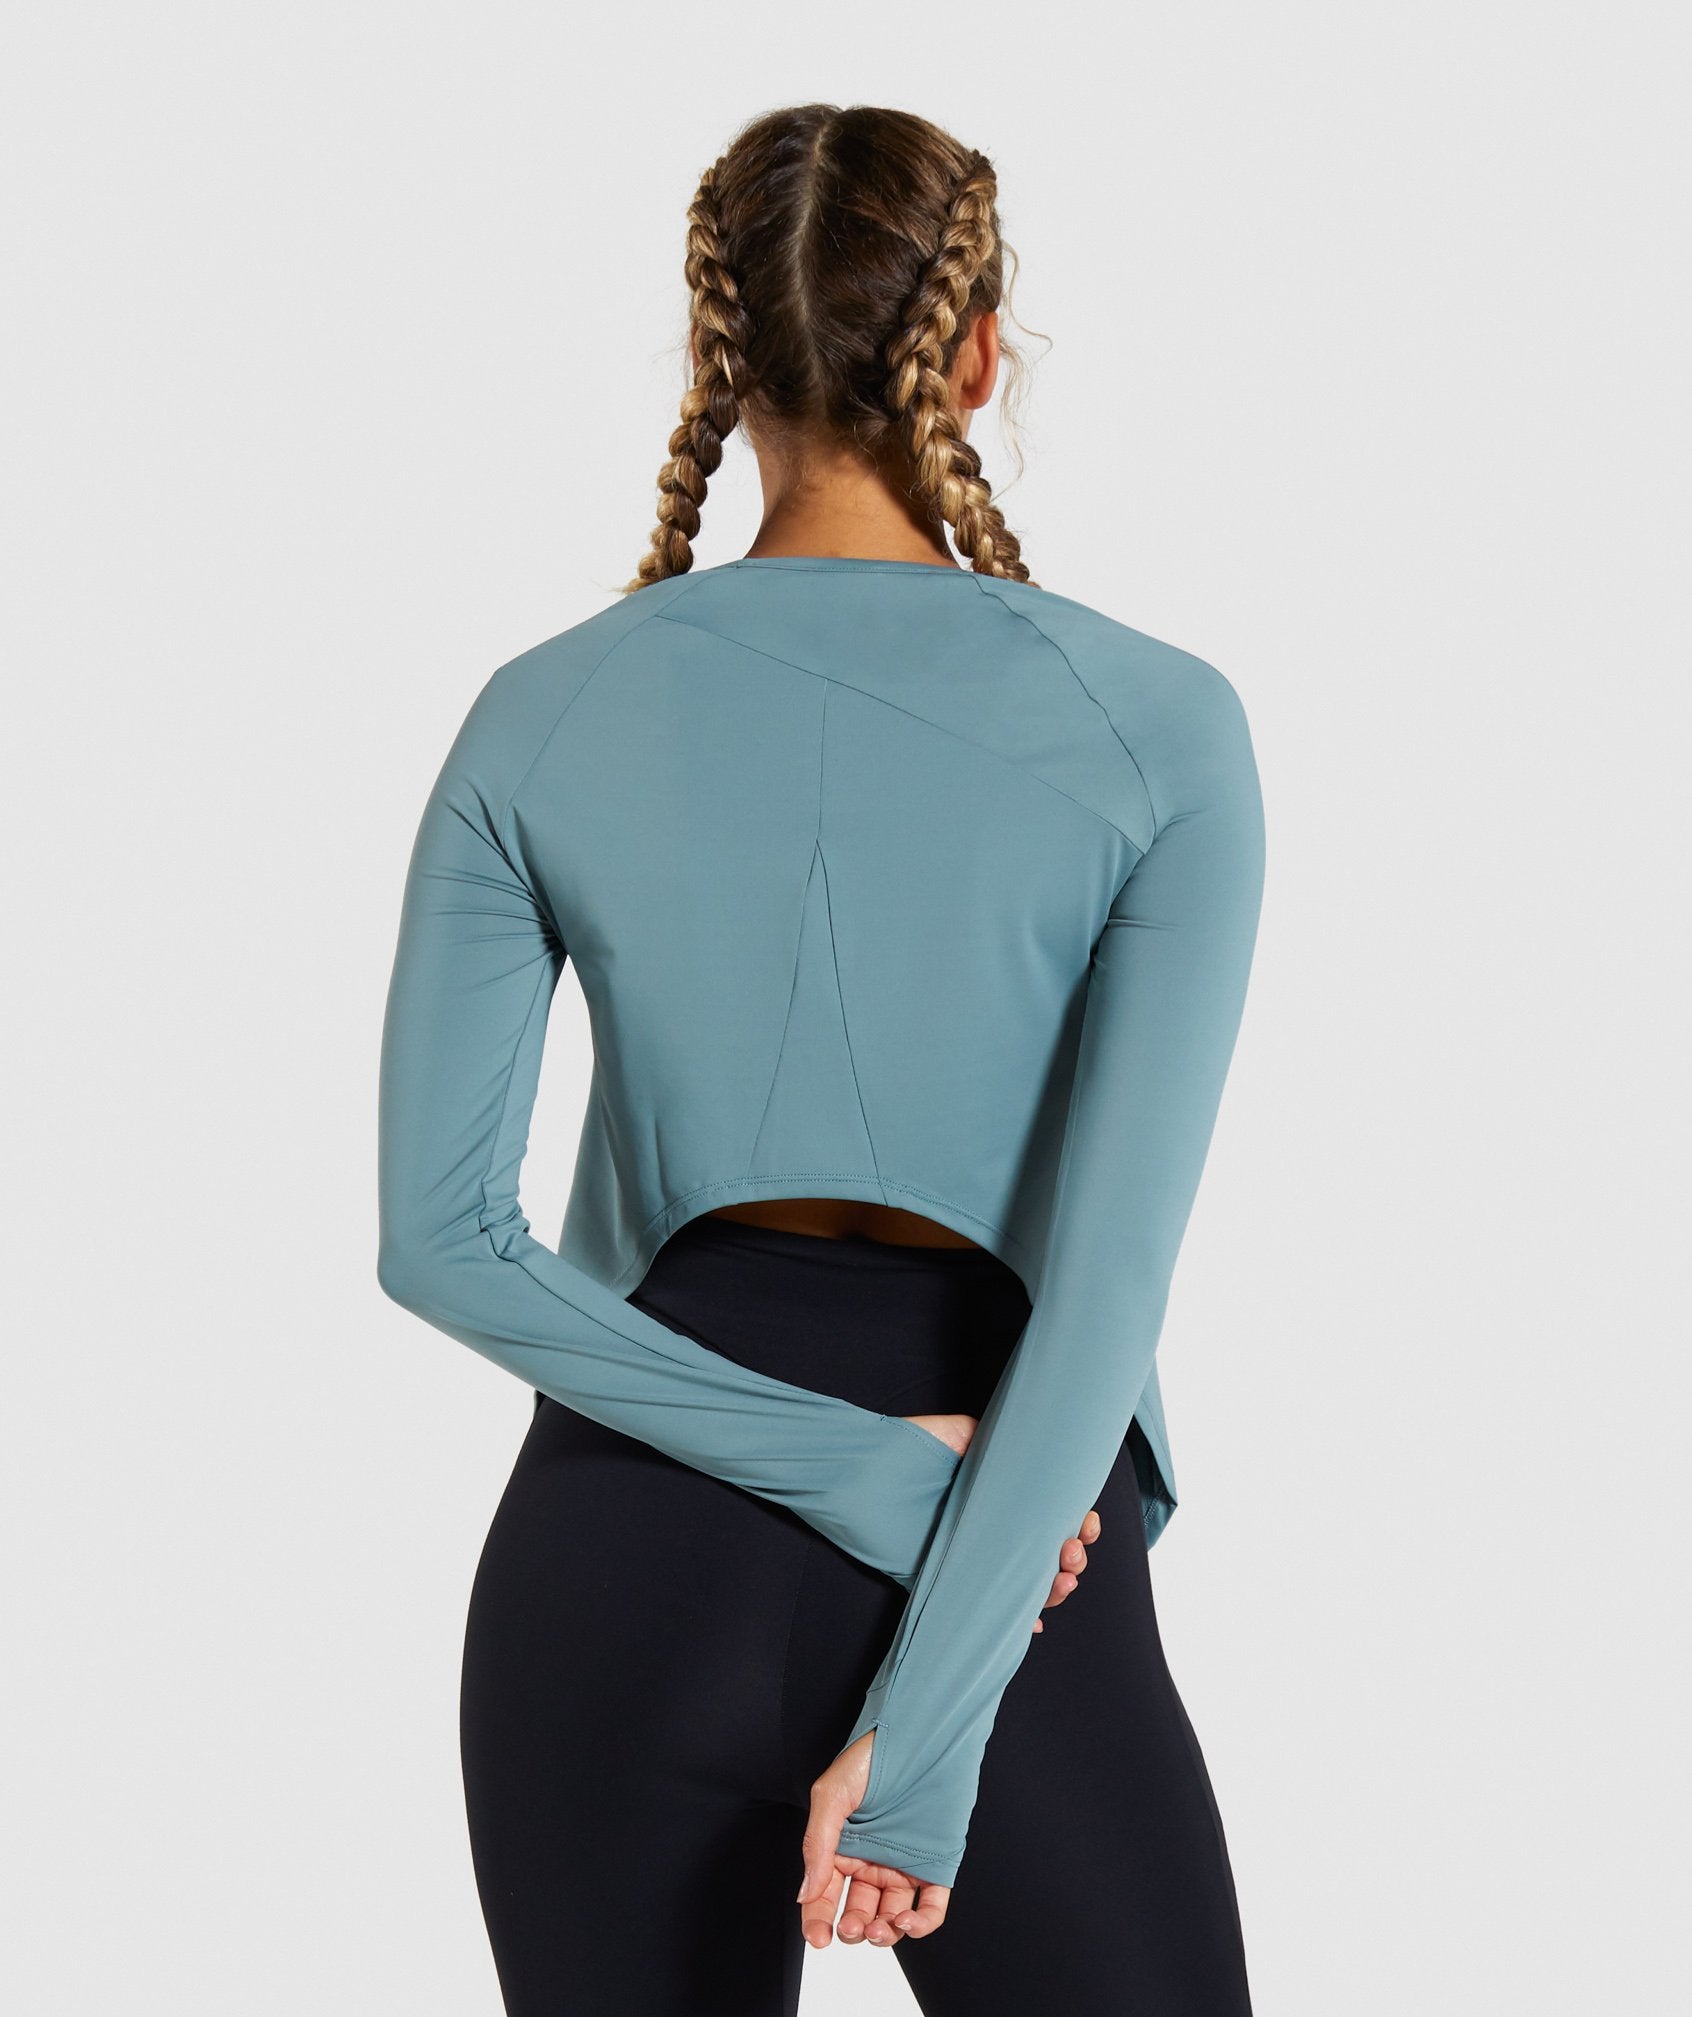 Captivate Long Sleeve Top in Turquoise - view 2